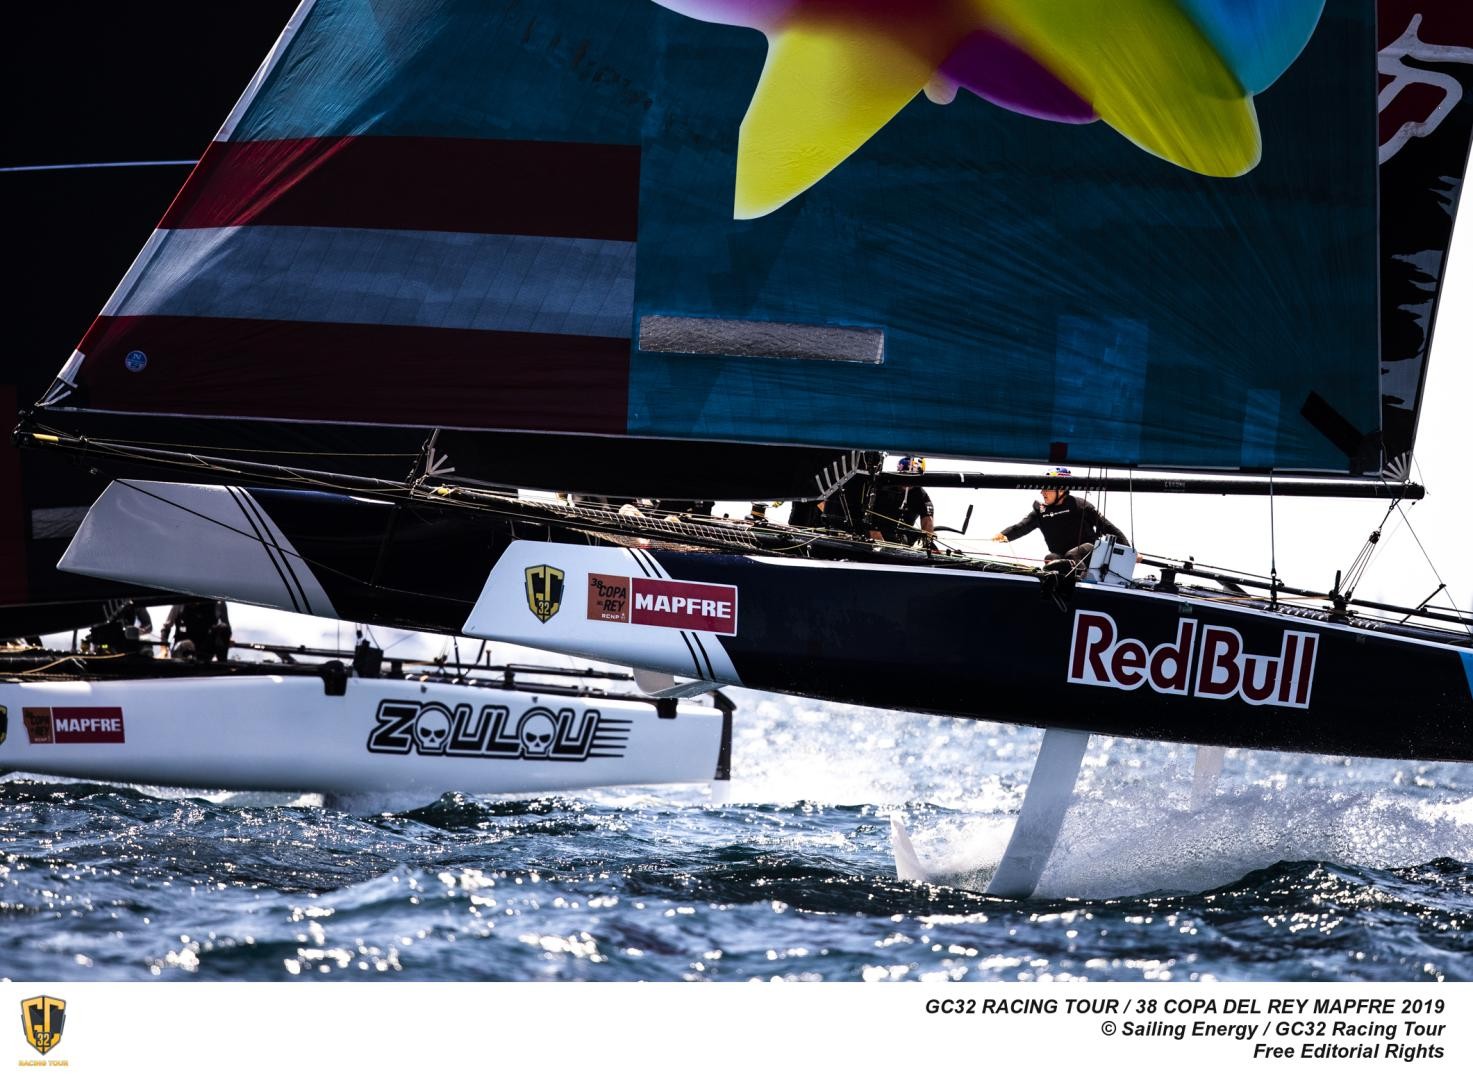 Oman Air match races to flying catamaran victory at Copa del Rey MAPFRE